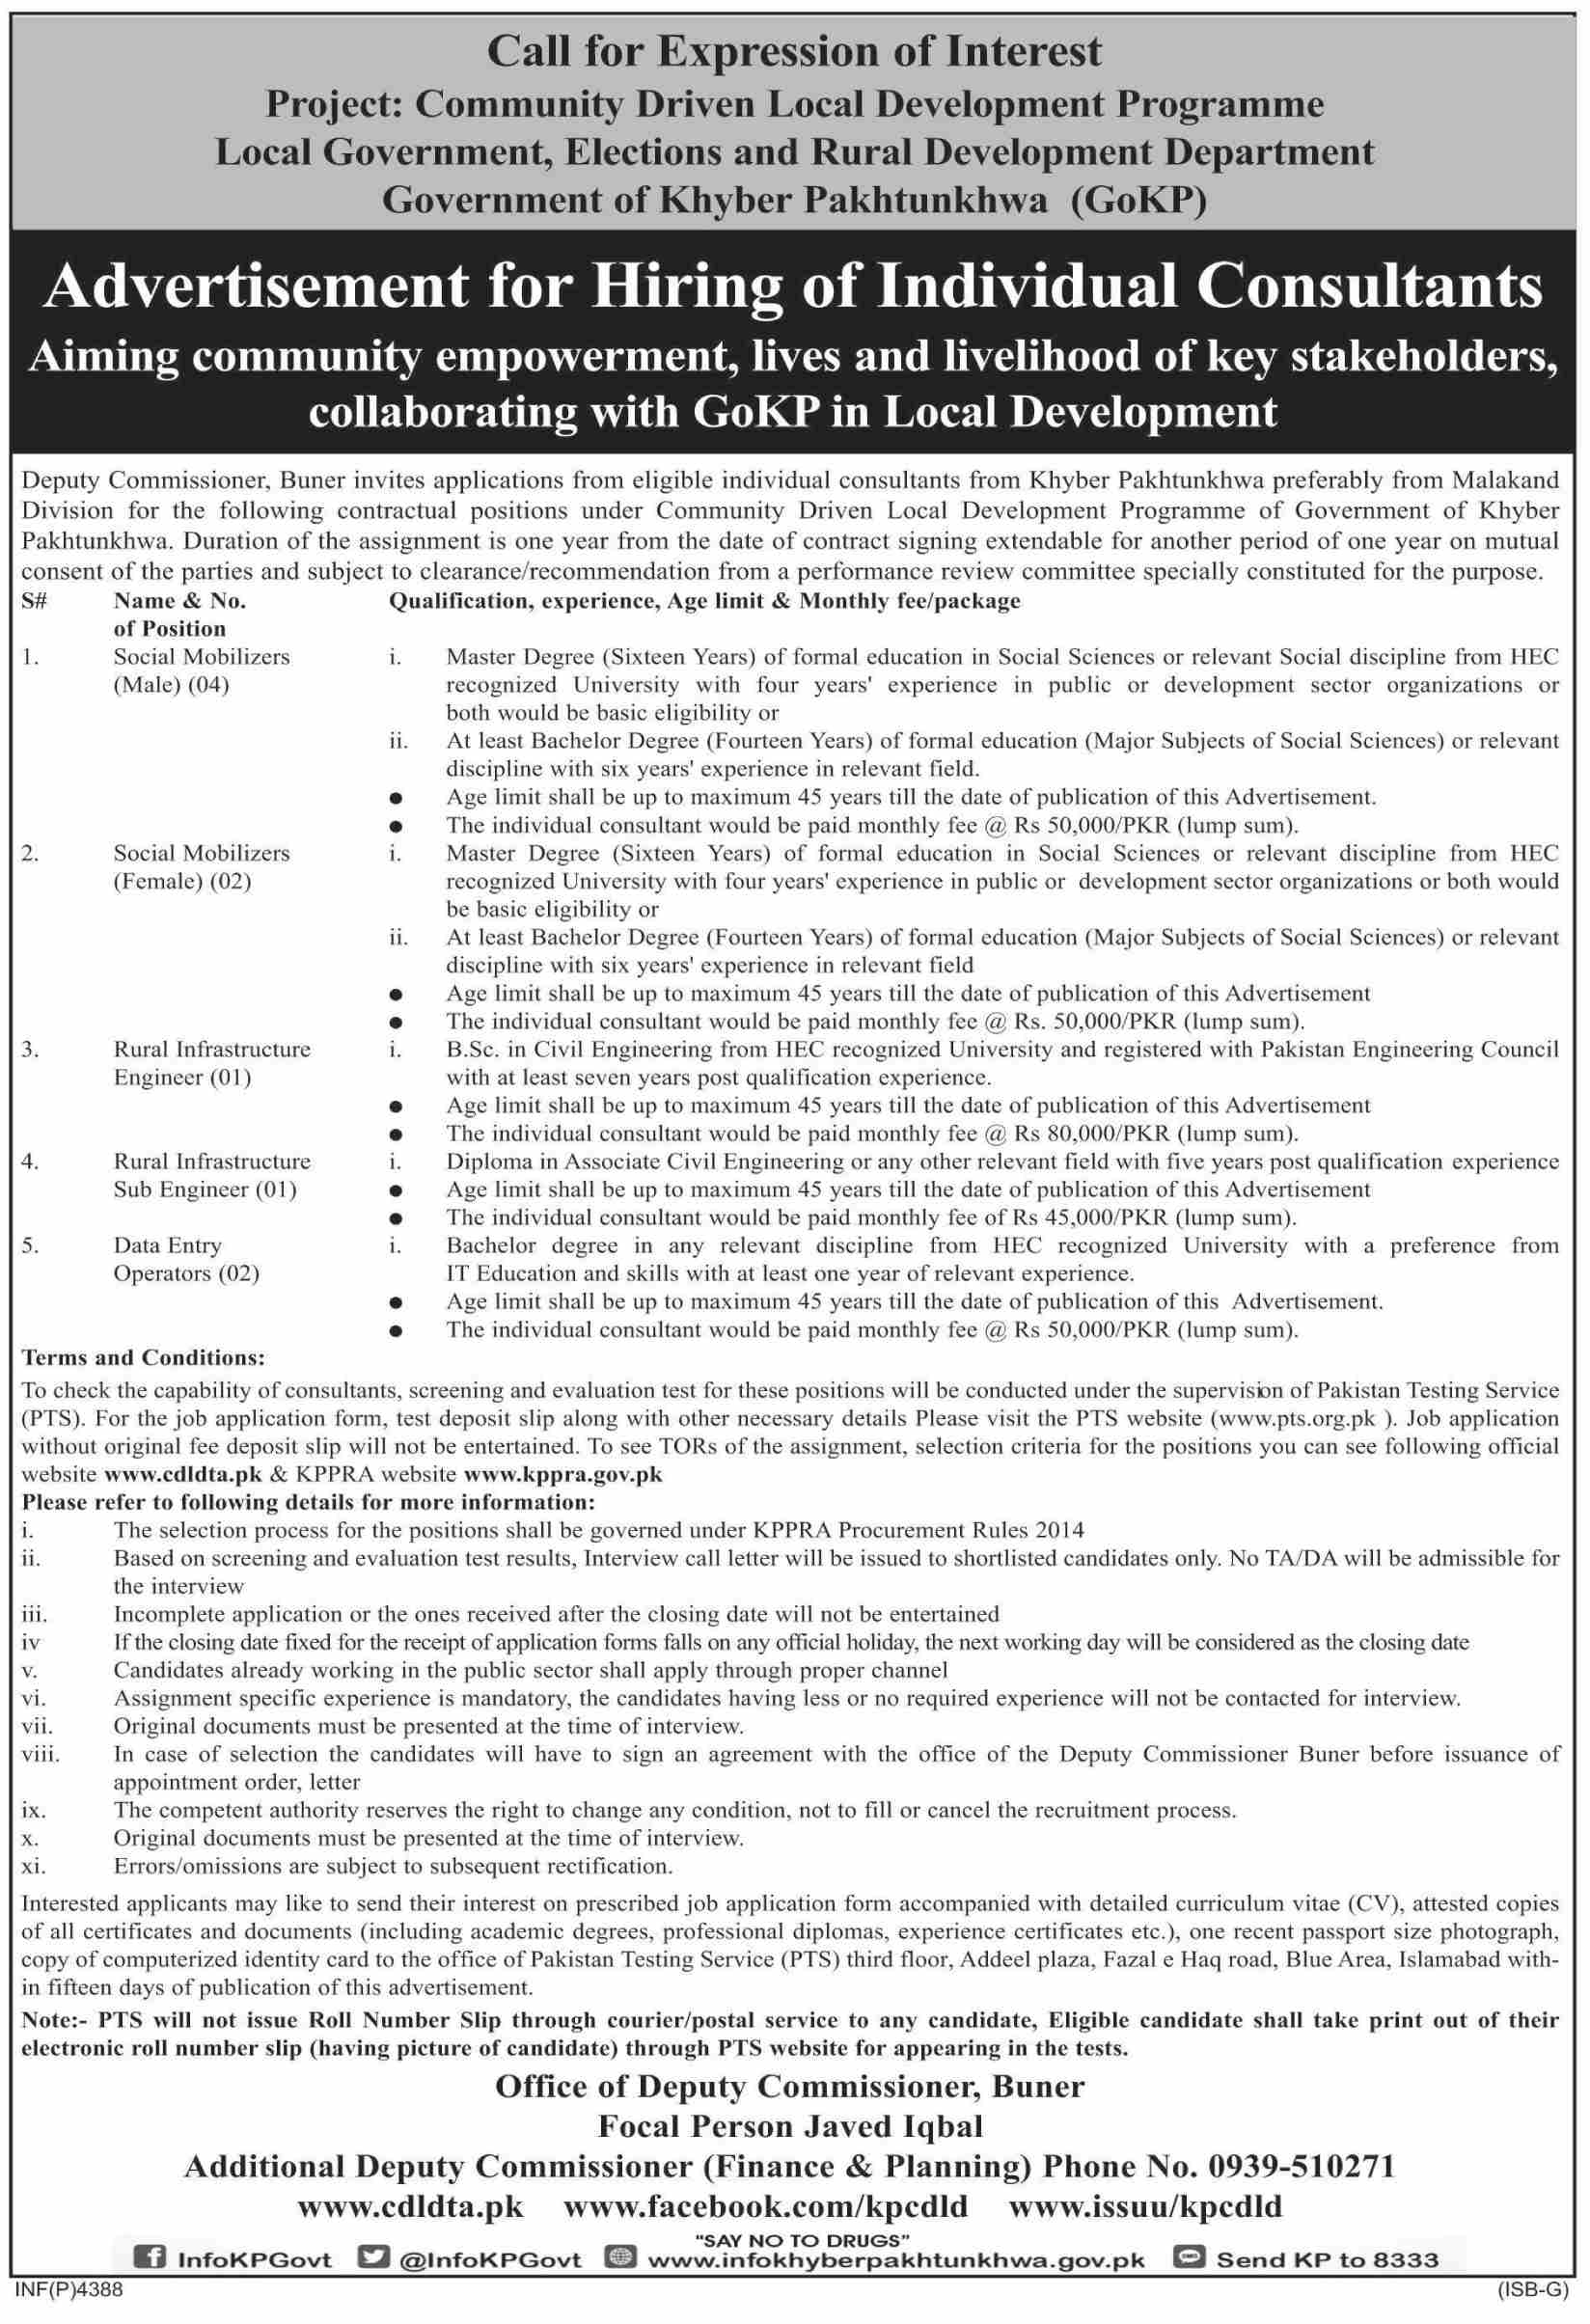 Jobs In Local Govt Election And Rural Development Department 22 October 2019